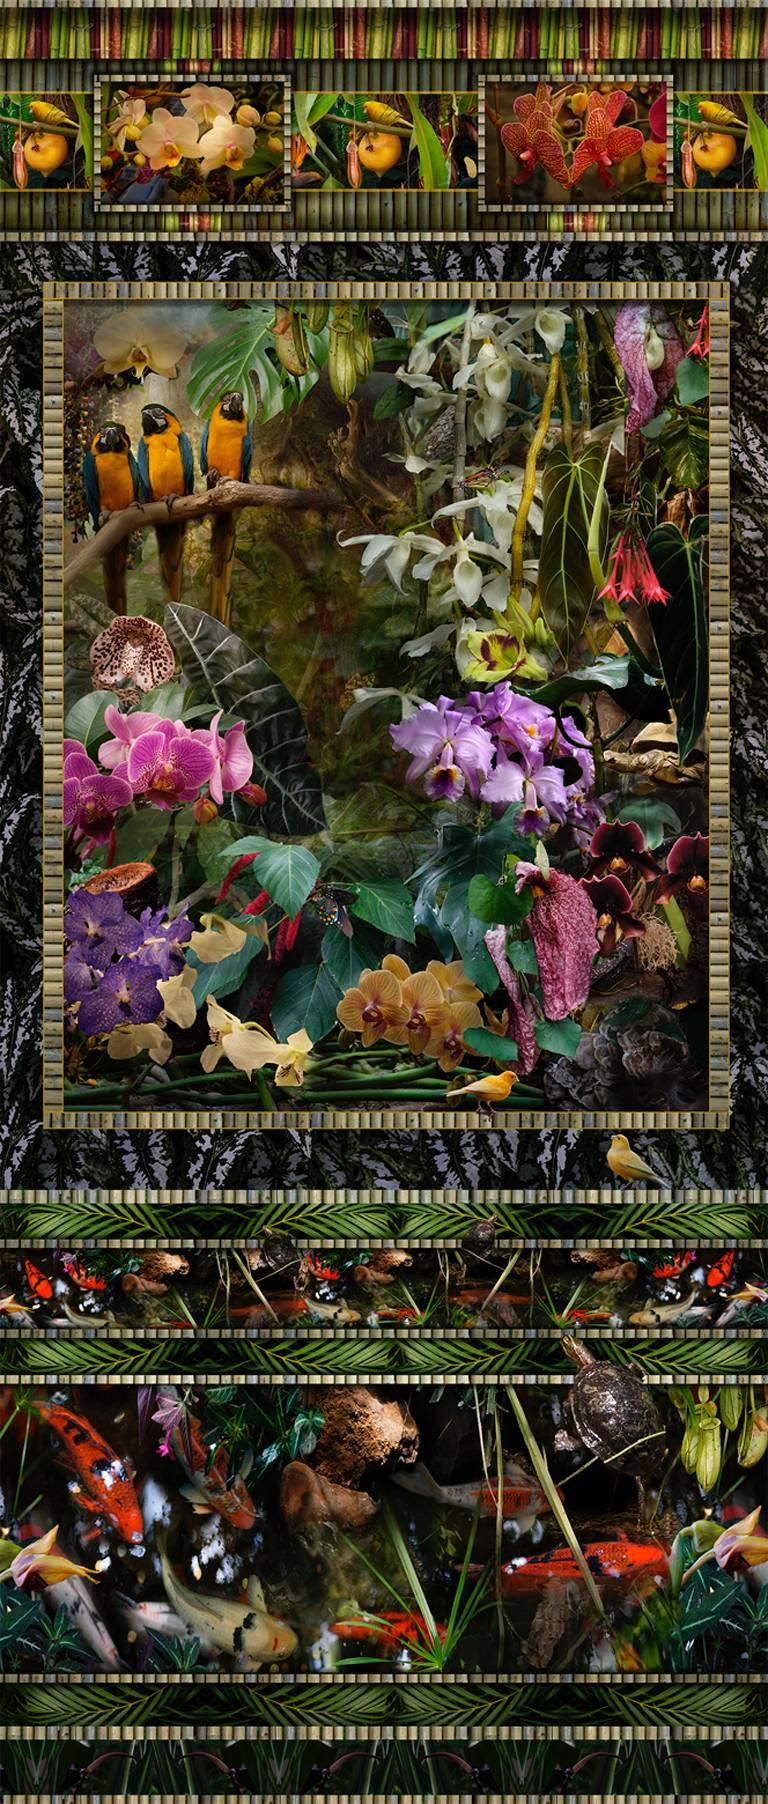 Lisa A. Frank Figurative Photograph - Conservatory (Vertical Still Life Photograph of Tropical Birds & Exotic Flowers)